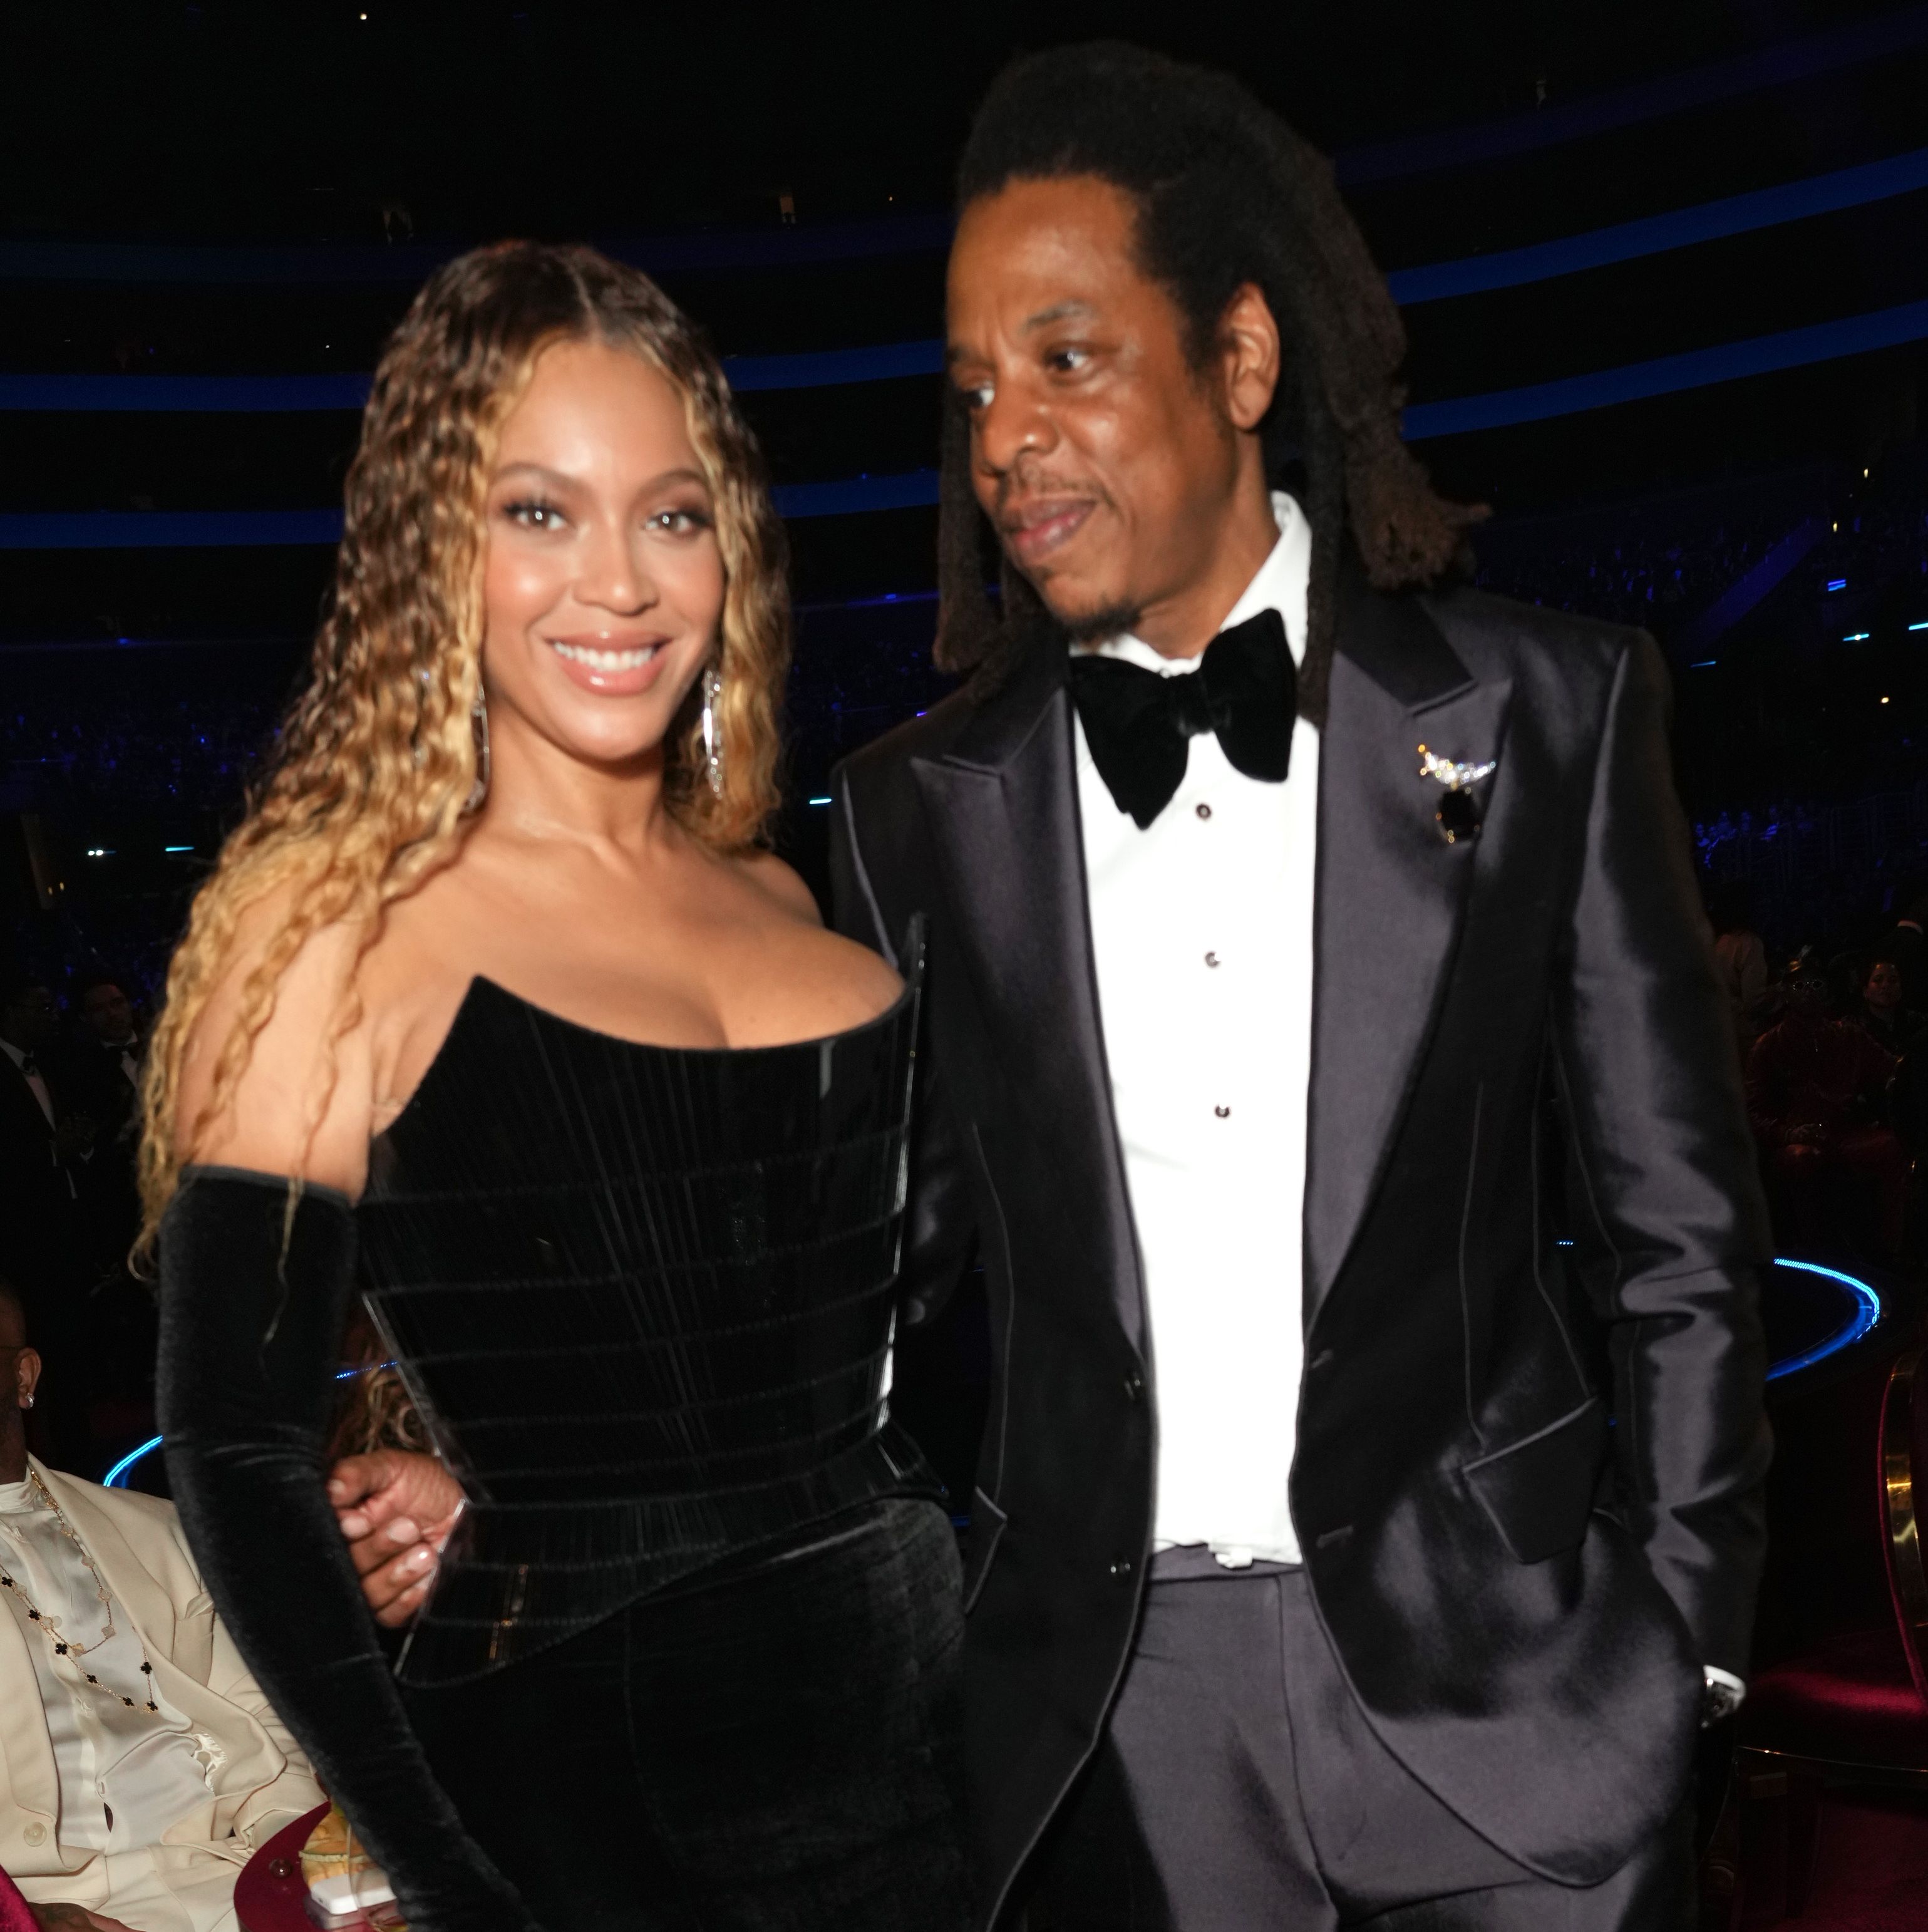 Beyoncé and Jay-Z Just Spent $200 Million on the Most Expensive Home Ever Sold in California